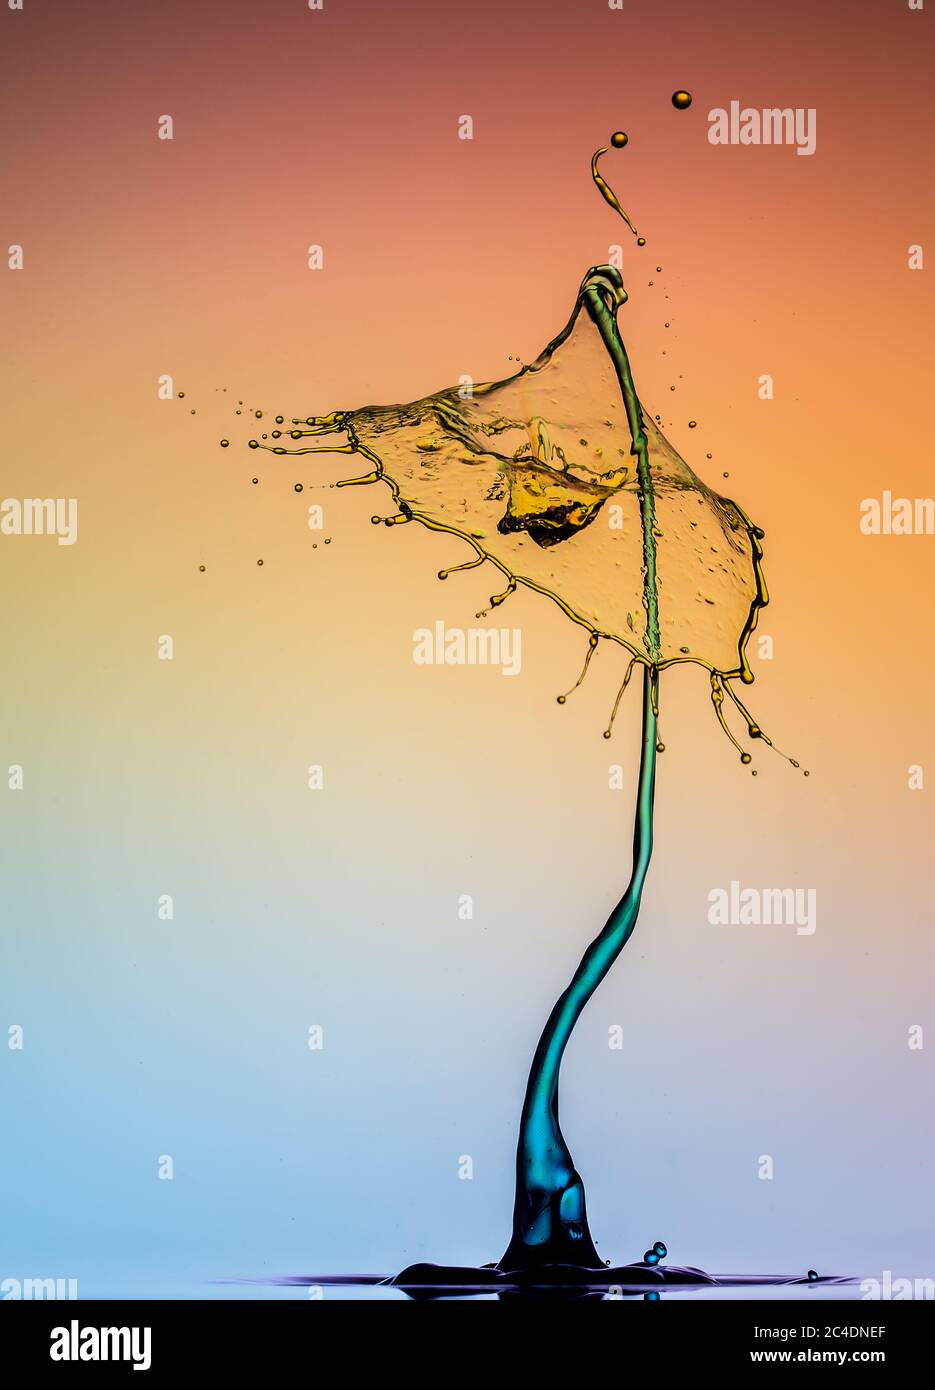 waterdrop collision photo abstract Stock Photo